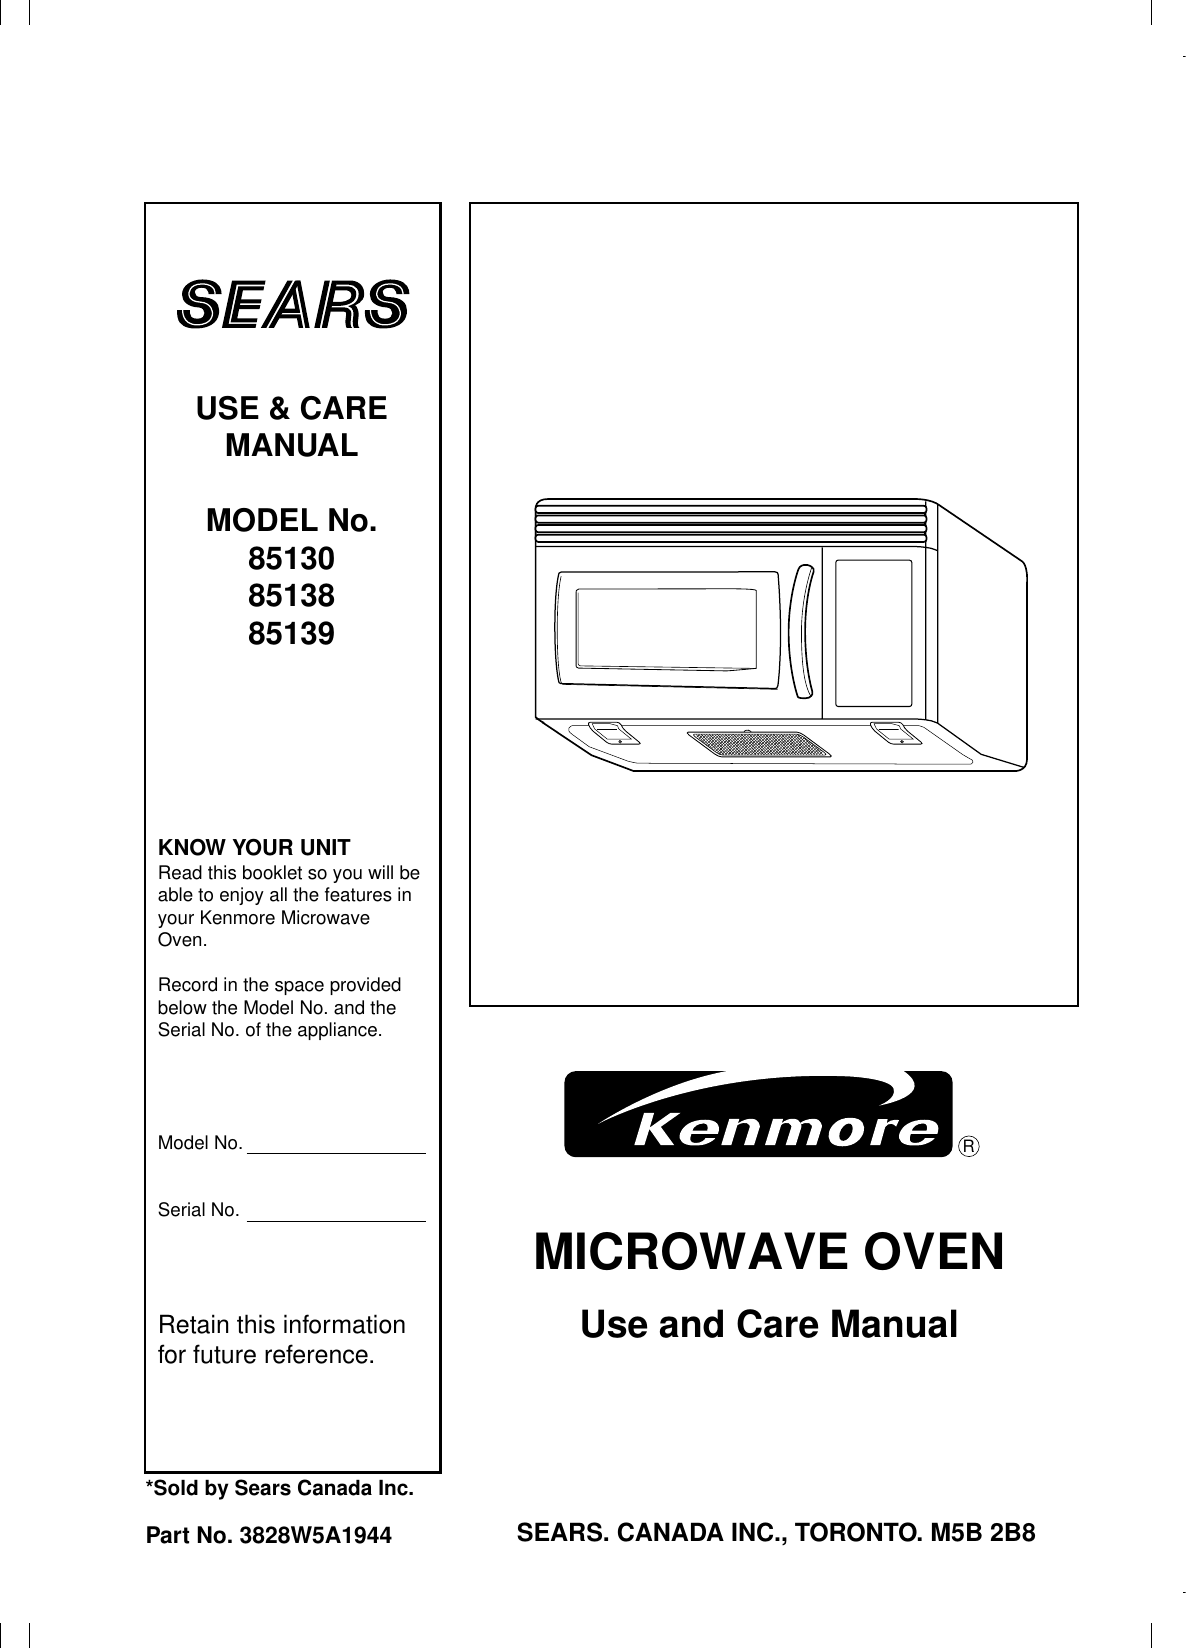 MICROWAVE OVENUse and Care ManualRUSE &amp; CAREMANUALMODEL No.851308513885139KNOW YOUR UNITRead this booklet so you will beable to enjoy all the features inyour Kenmore Microwave Oven.Record in the space providedbelow the Model No. and theSerial No. of the appliance.Model No.Serial No.Retain this informationfor future reference.*Sold by Sears Canada Inc.Part No. 3828W5A1944 SEARS. CANADA INC., TORONTO. M5B 2B8